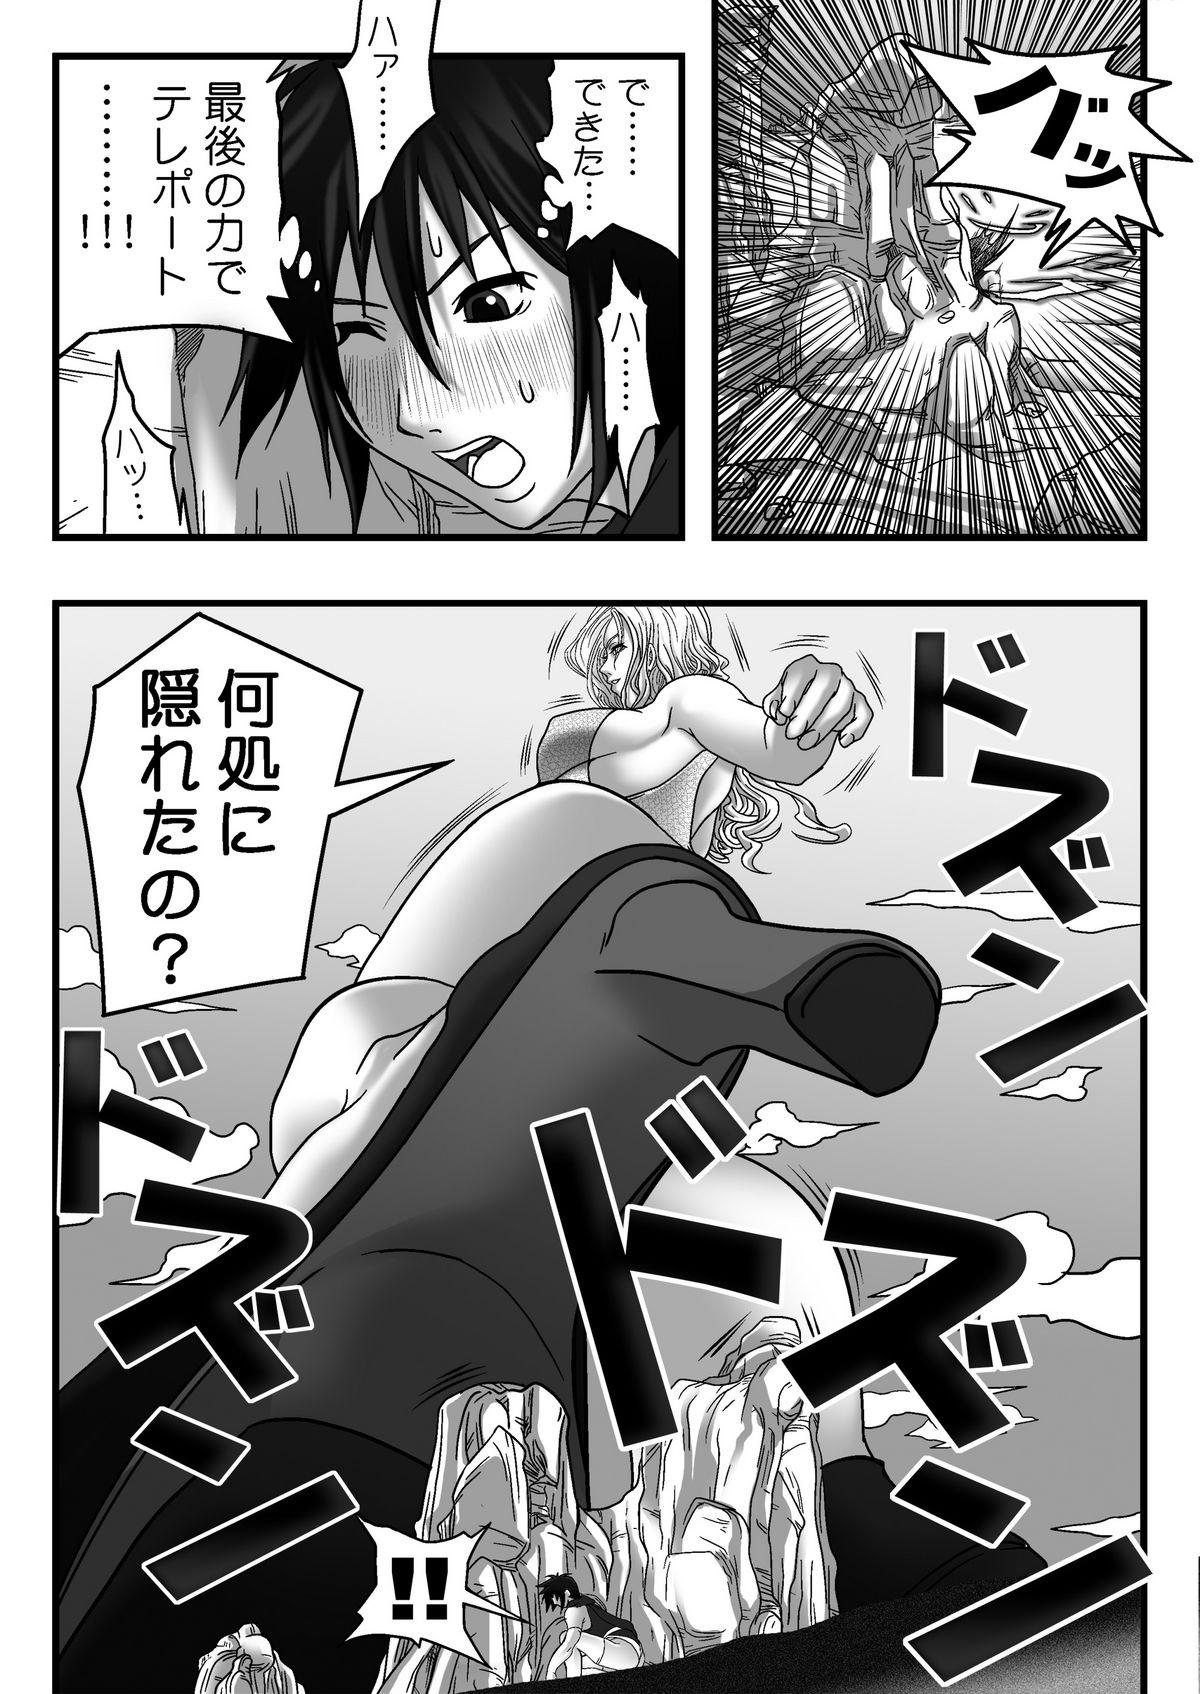 Ass サイズフェチコミックVol.3 Rough Sex - Page 9